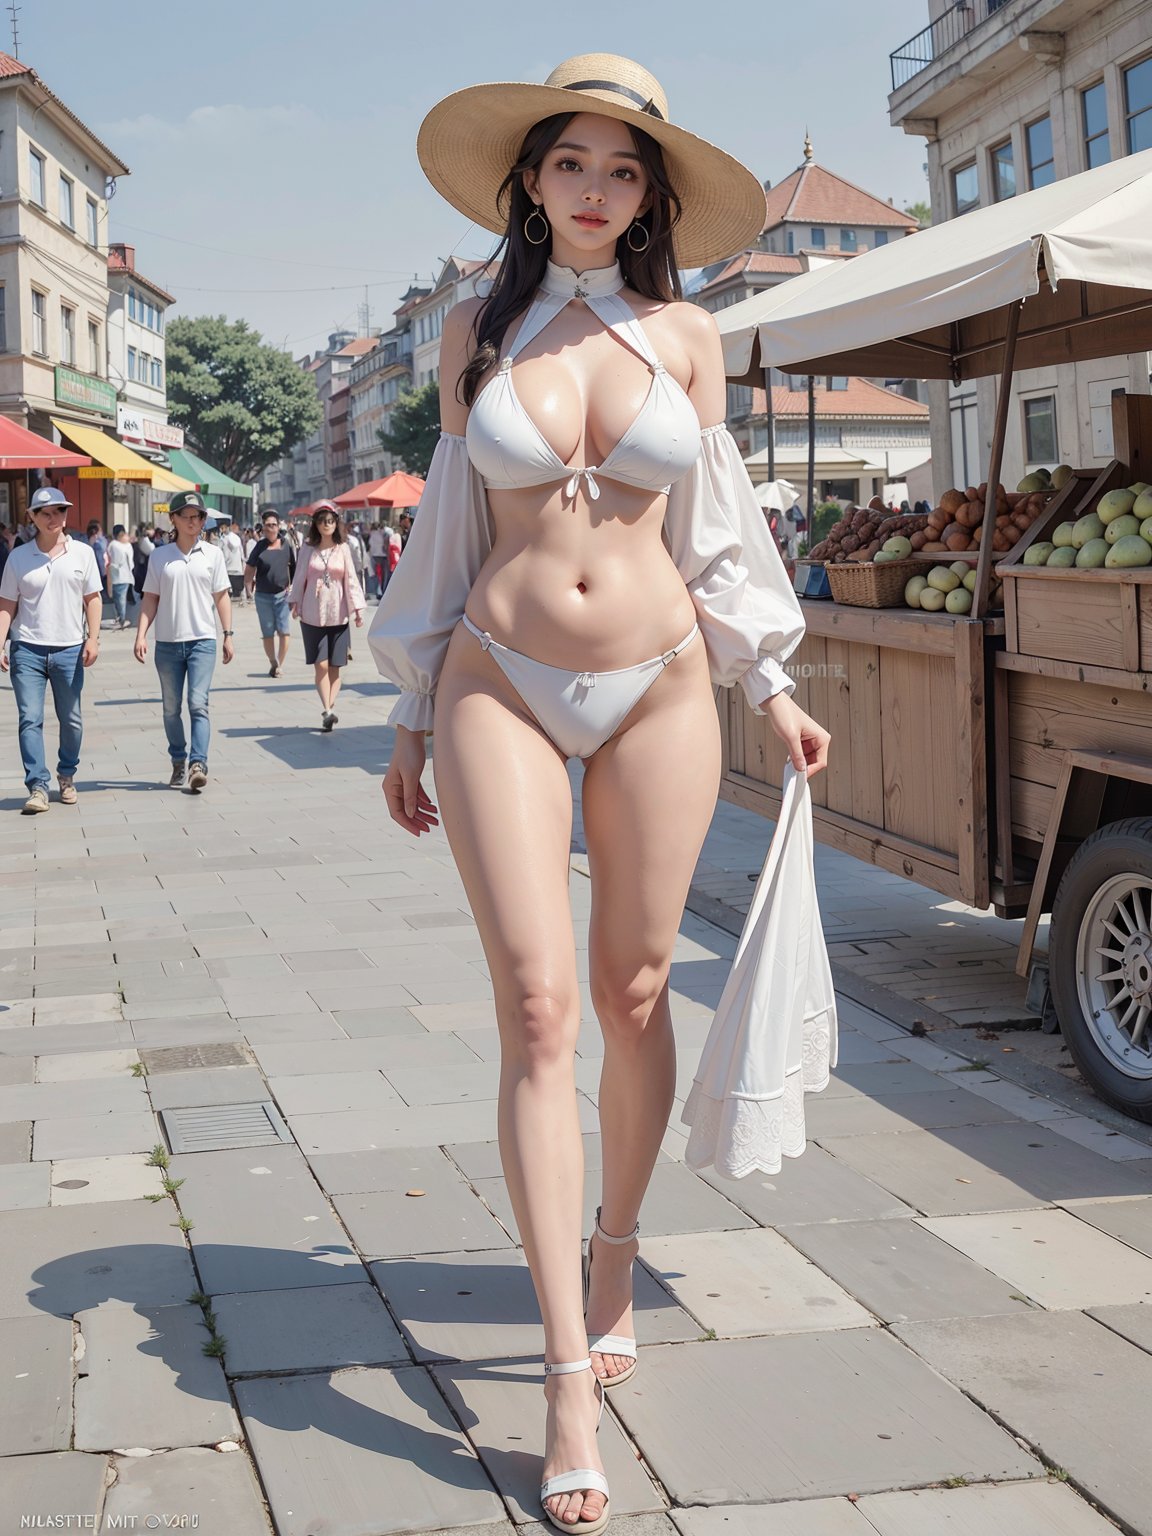 (masterpiece, best quality, photo-realistic, ultra-high definition resolution, level out:2.0), (laughing, smiling:1.1), (brown eyes, k-pop idol, korean beauty:1.4), (20-year-old girl:2.0), (aesthetical, stylish), (gigantic breast, narrow waist, wide hips:1.6), (full body:1.4), (Cultural wonders of Istanbul - Modest clothing, comfortable shoes, and a hat for sun protection while exploring historic landmarks, bustling markets, and diverse neighborhoods in Istanbul.:1.4)